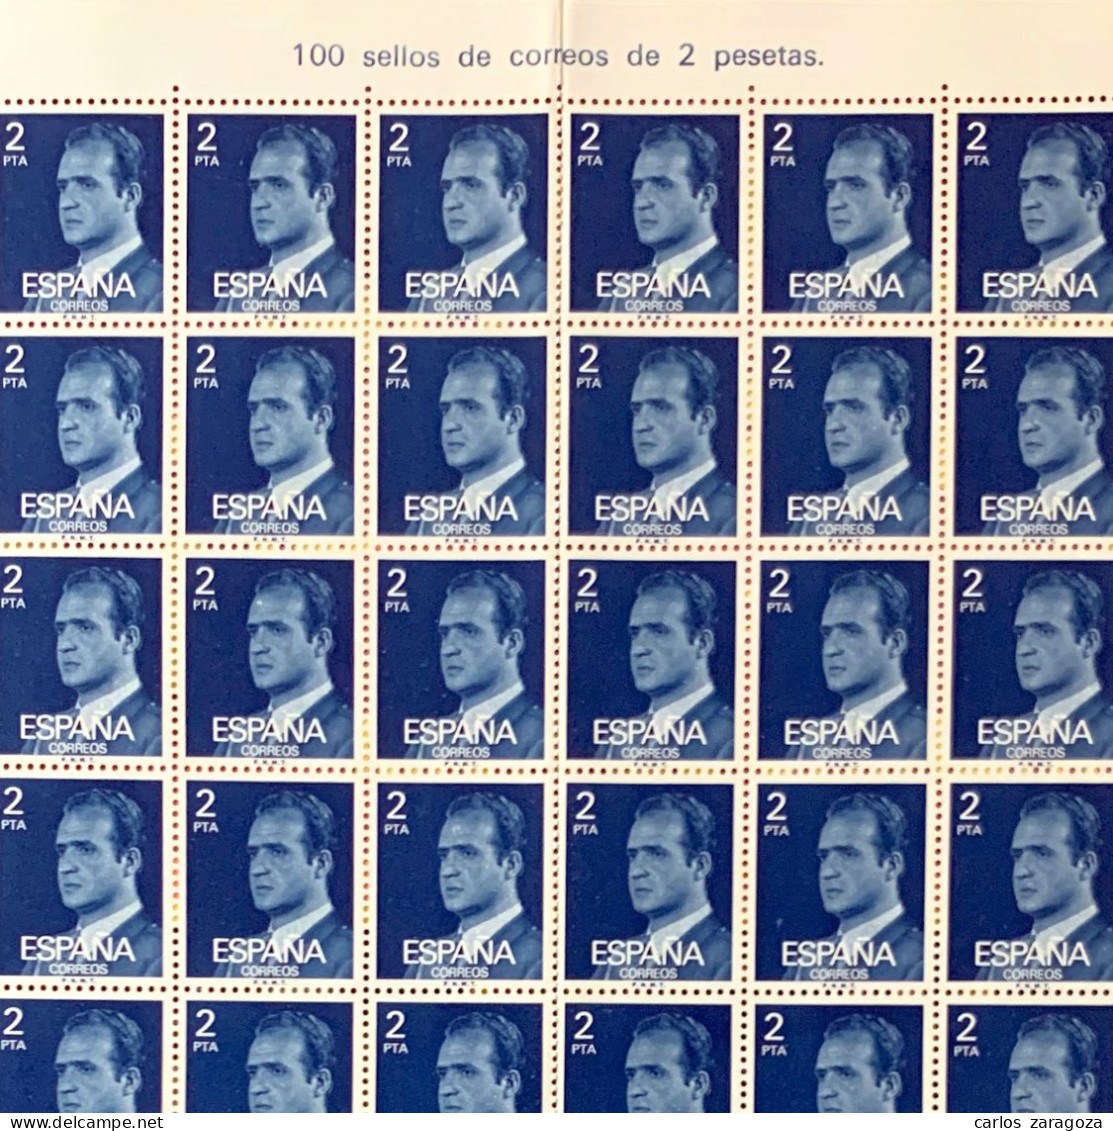 SPAIN 1976—KING JUAN CARLOS #1975—COMPLETE SHEET 100 MNH STAMPS—DEFINITIVE ISSUE—ESPAGNE Feuille Yt 1991 Timbres Neufs - Feuilles Complètes